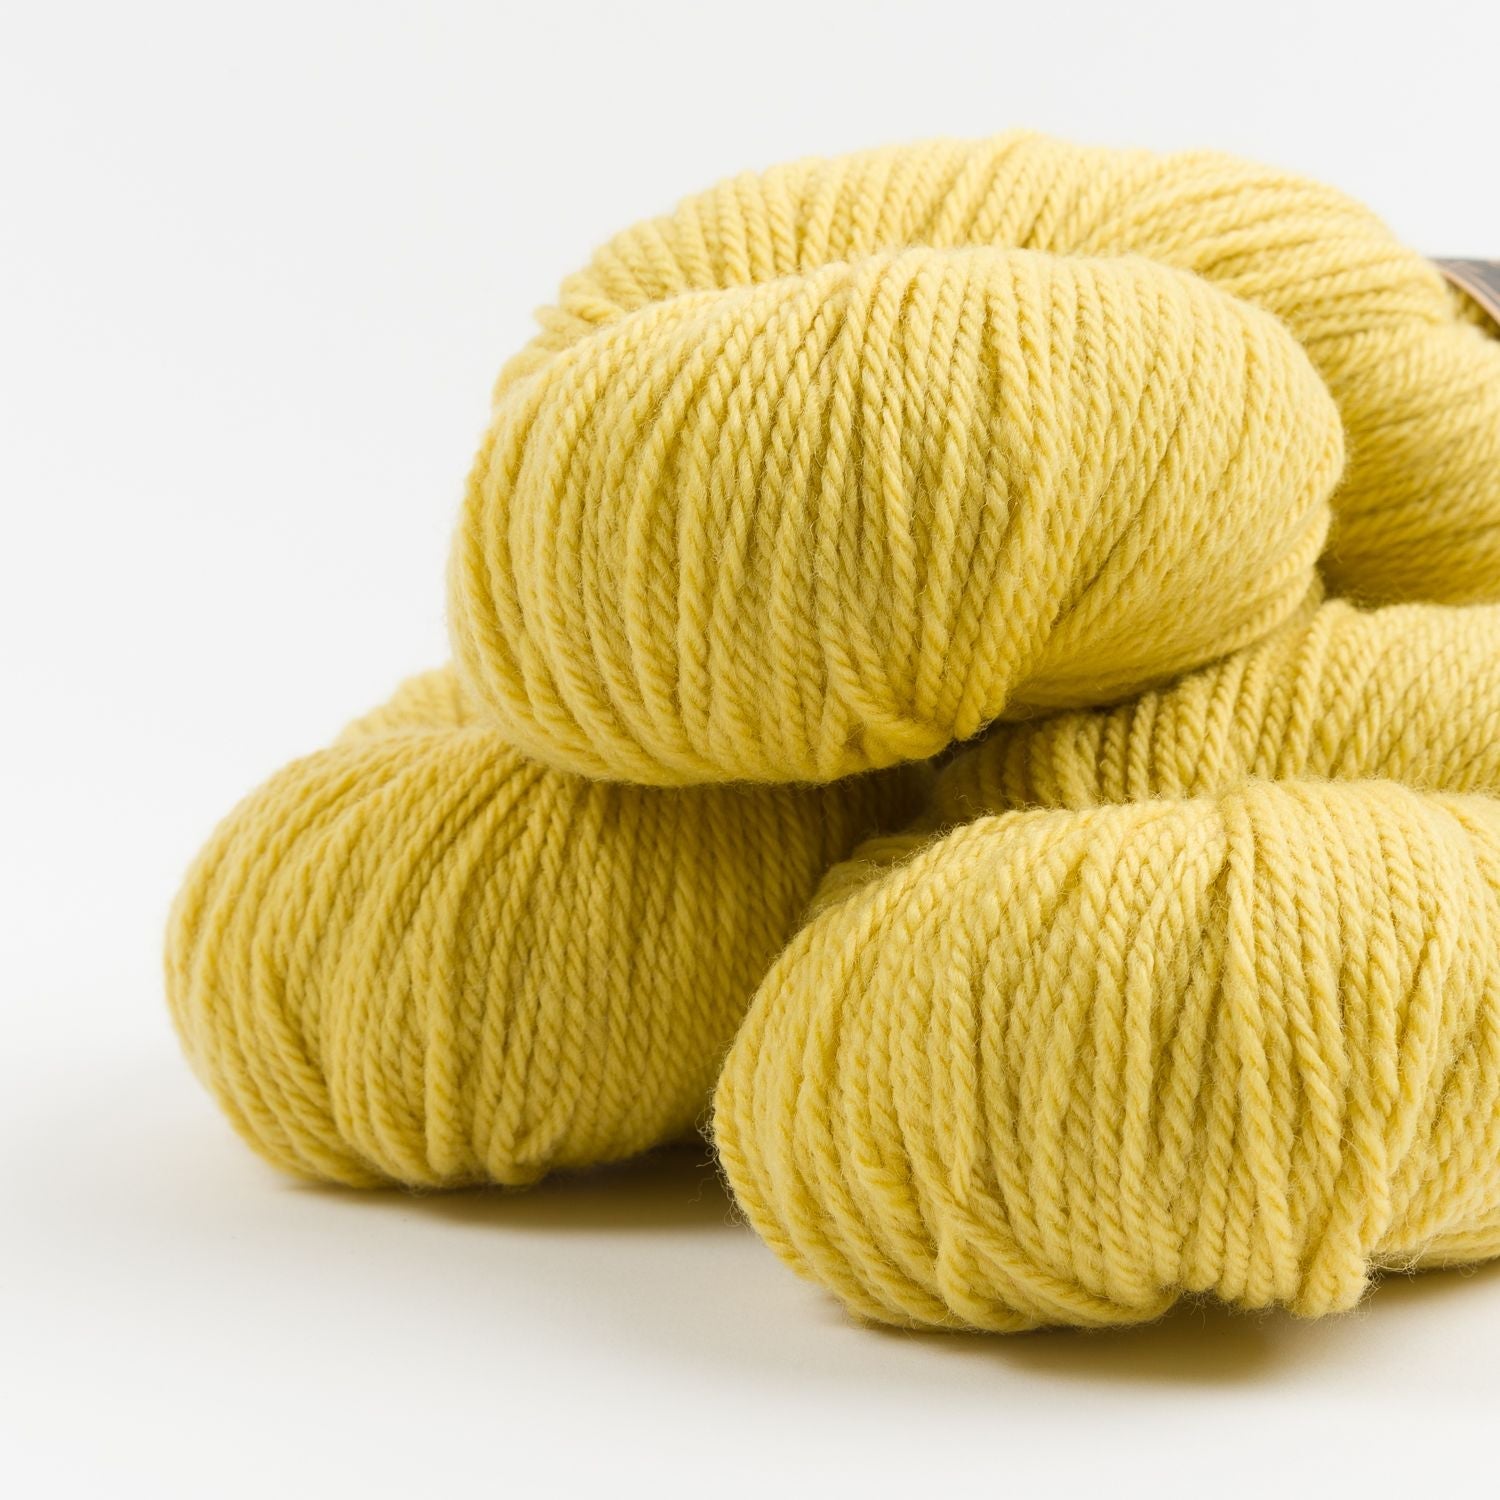 WESTKNITS KIT - BUTTERCUP (FOUR SKEINS)